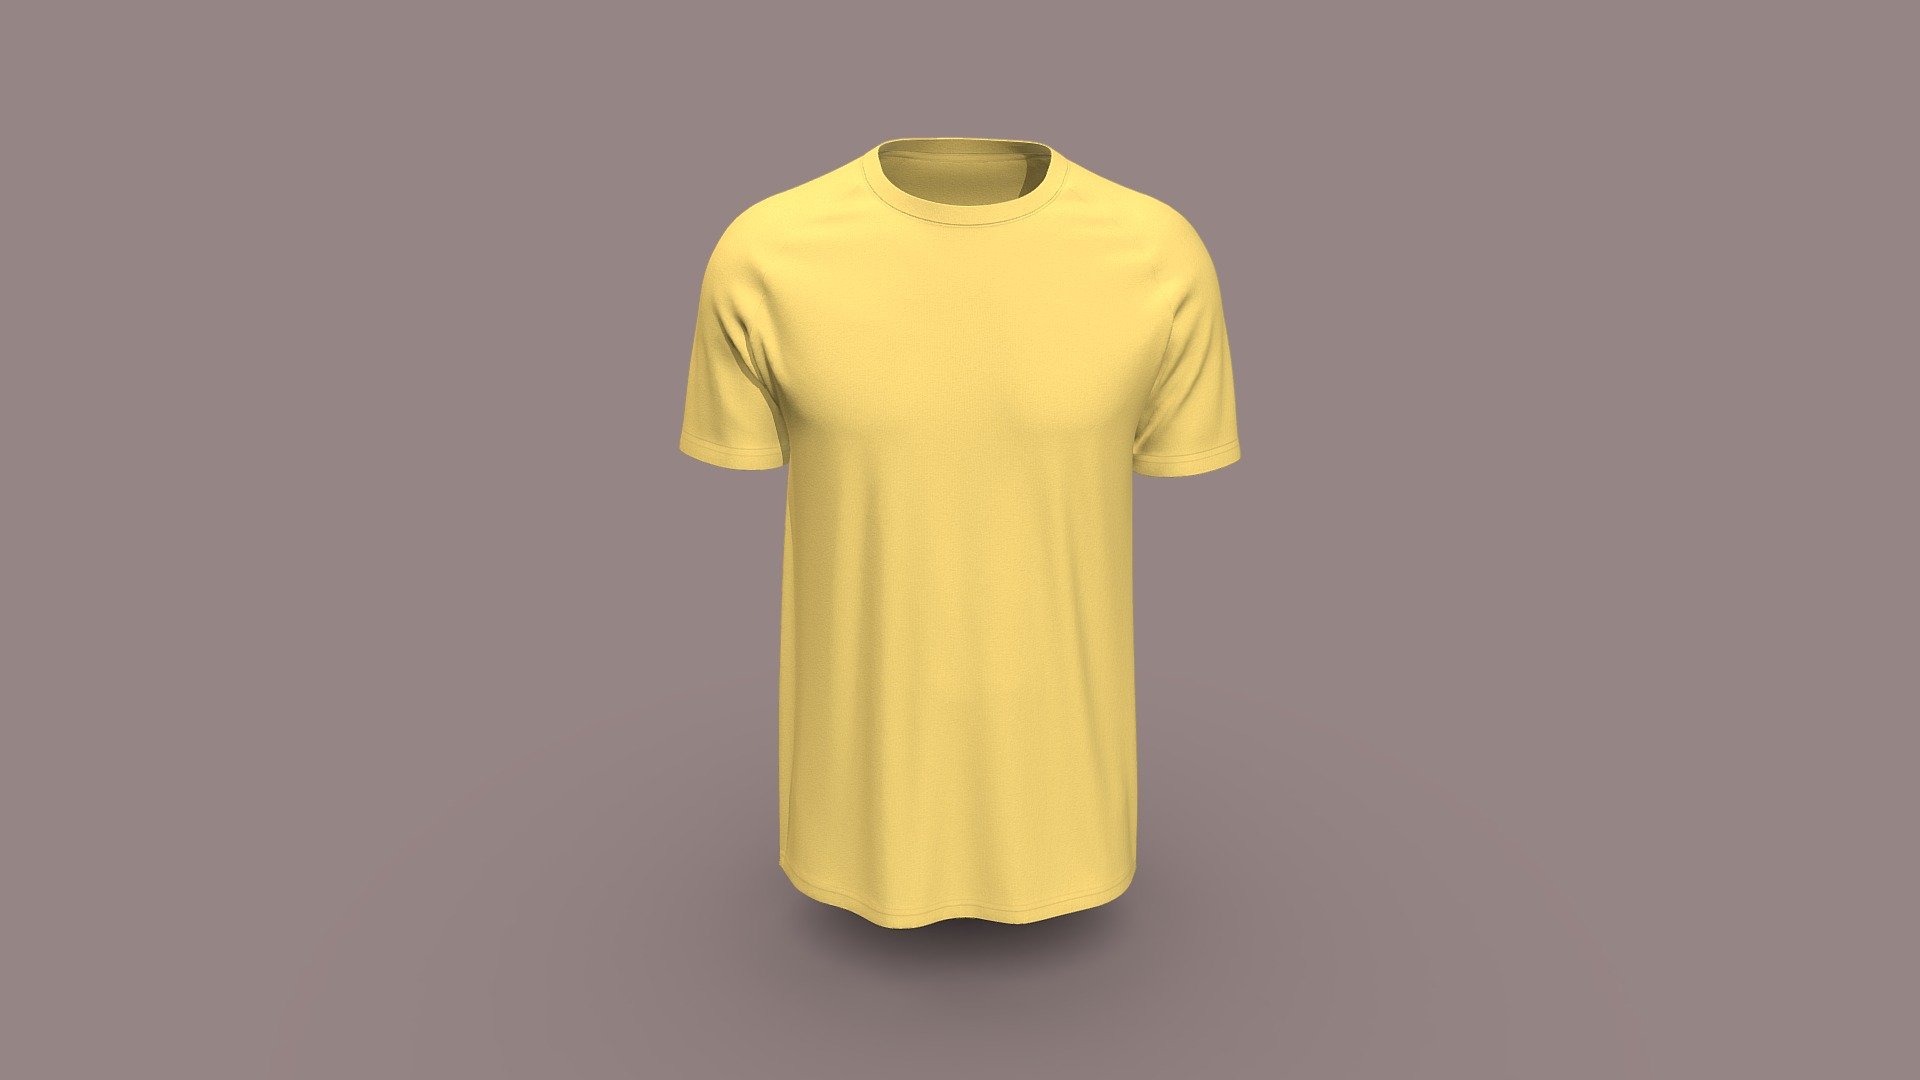 Cloth Title = Raglan Sleeve T- Shirt With Round Neck Yellow 

SKU = DG100085 

Category = Men 

Product Type = Tee 

Cloth Length = Regular 

Body Fit = Slim 

Fit Occasion = Casual  

Sleeve Style = Raglan Sleeve 


Our Services:

3D Apparel Design.

OBJ,FBX,GLTF Making with High/Low Poly.

Fabric Digitalization.

Mockup making.

3D Teck Pack.

Pattern Making.

2D Illustration.

Cloth Animation and 360 Spin Video.


Contact us:- 

Email: info@digitalfashionwear.com 

Website: https://digitalfashionwear.com 


We designed all the types of cloth specially focused on product visualization, e-commerce, fitting, and production. 

We will design: 

T-shirts 

Polo shirts 

Hoodies 

Sweatshirt 

Jackets 

Shirts 

TankTops 

Trousers 

Bras 

Underwear 

Blazer 

Aprons 

Leggings 

and All Fashion items. 





Our goal is to make sure what we provide you, meets your demand 3d model